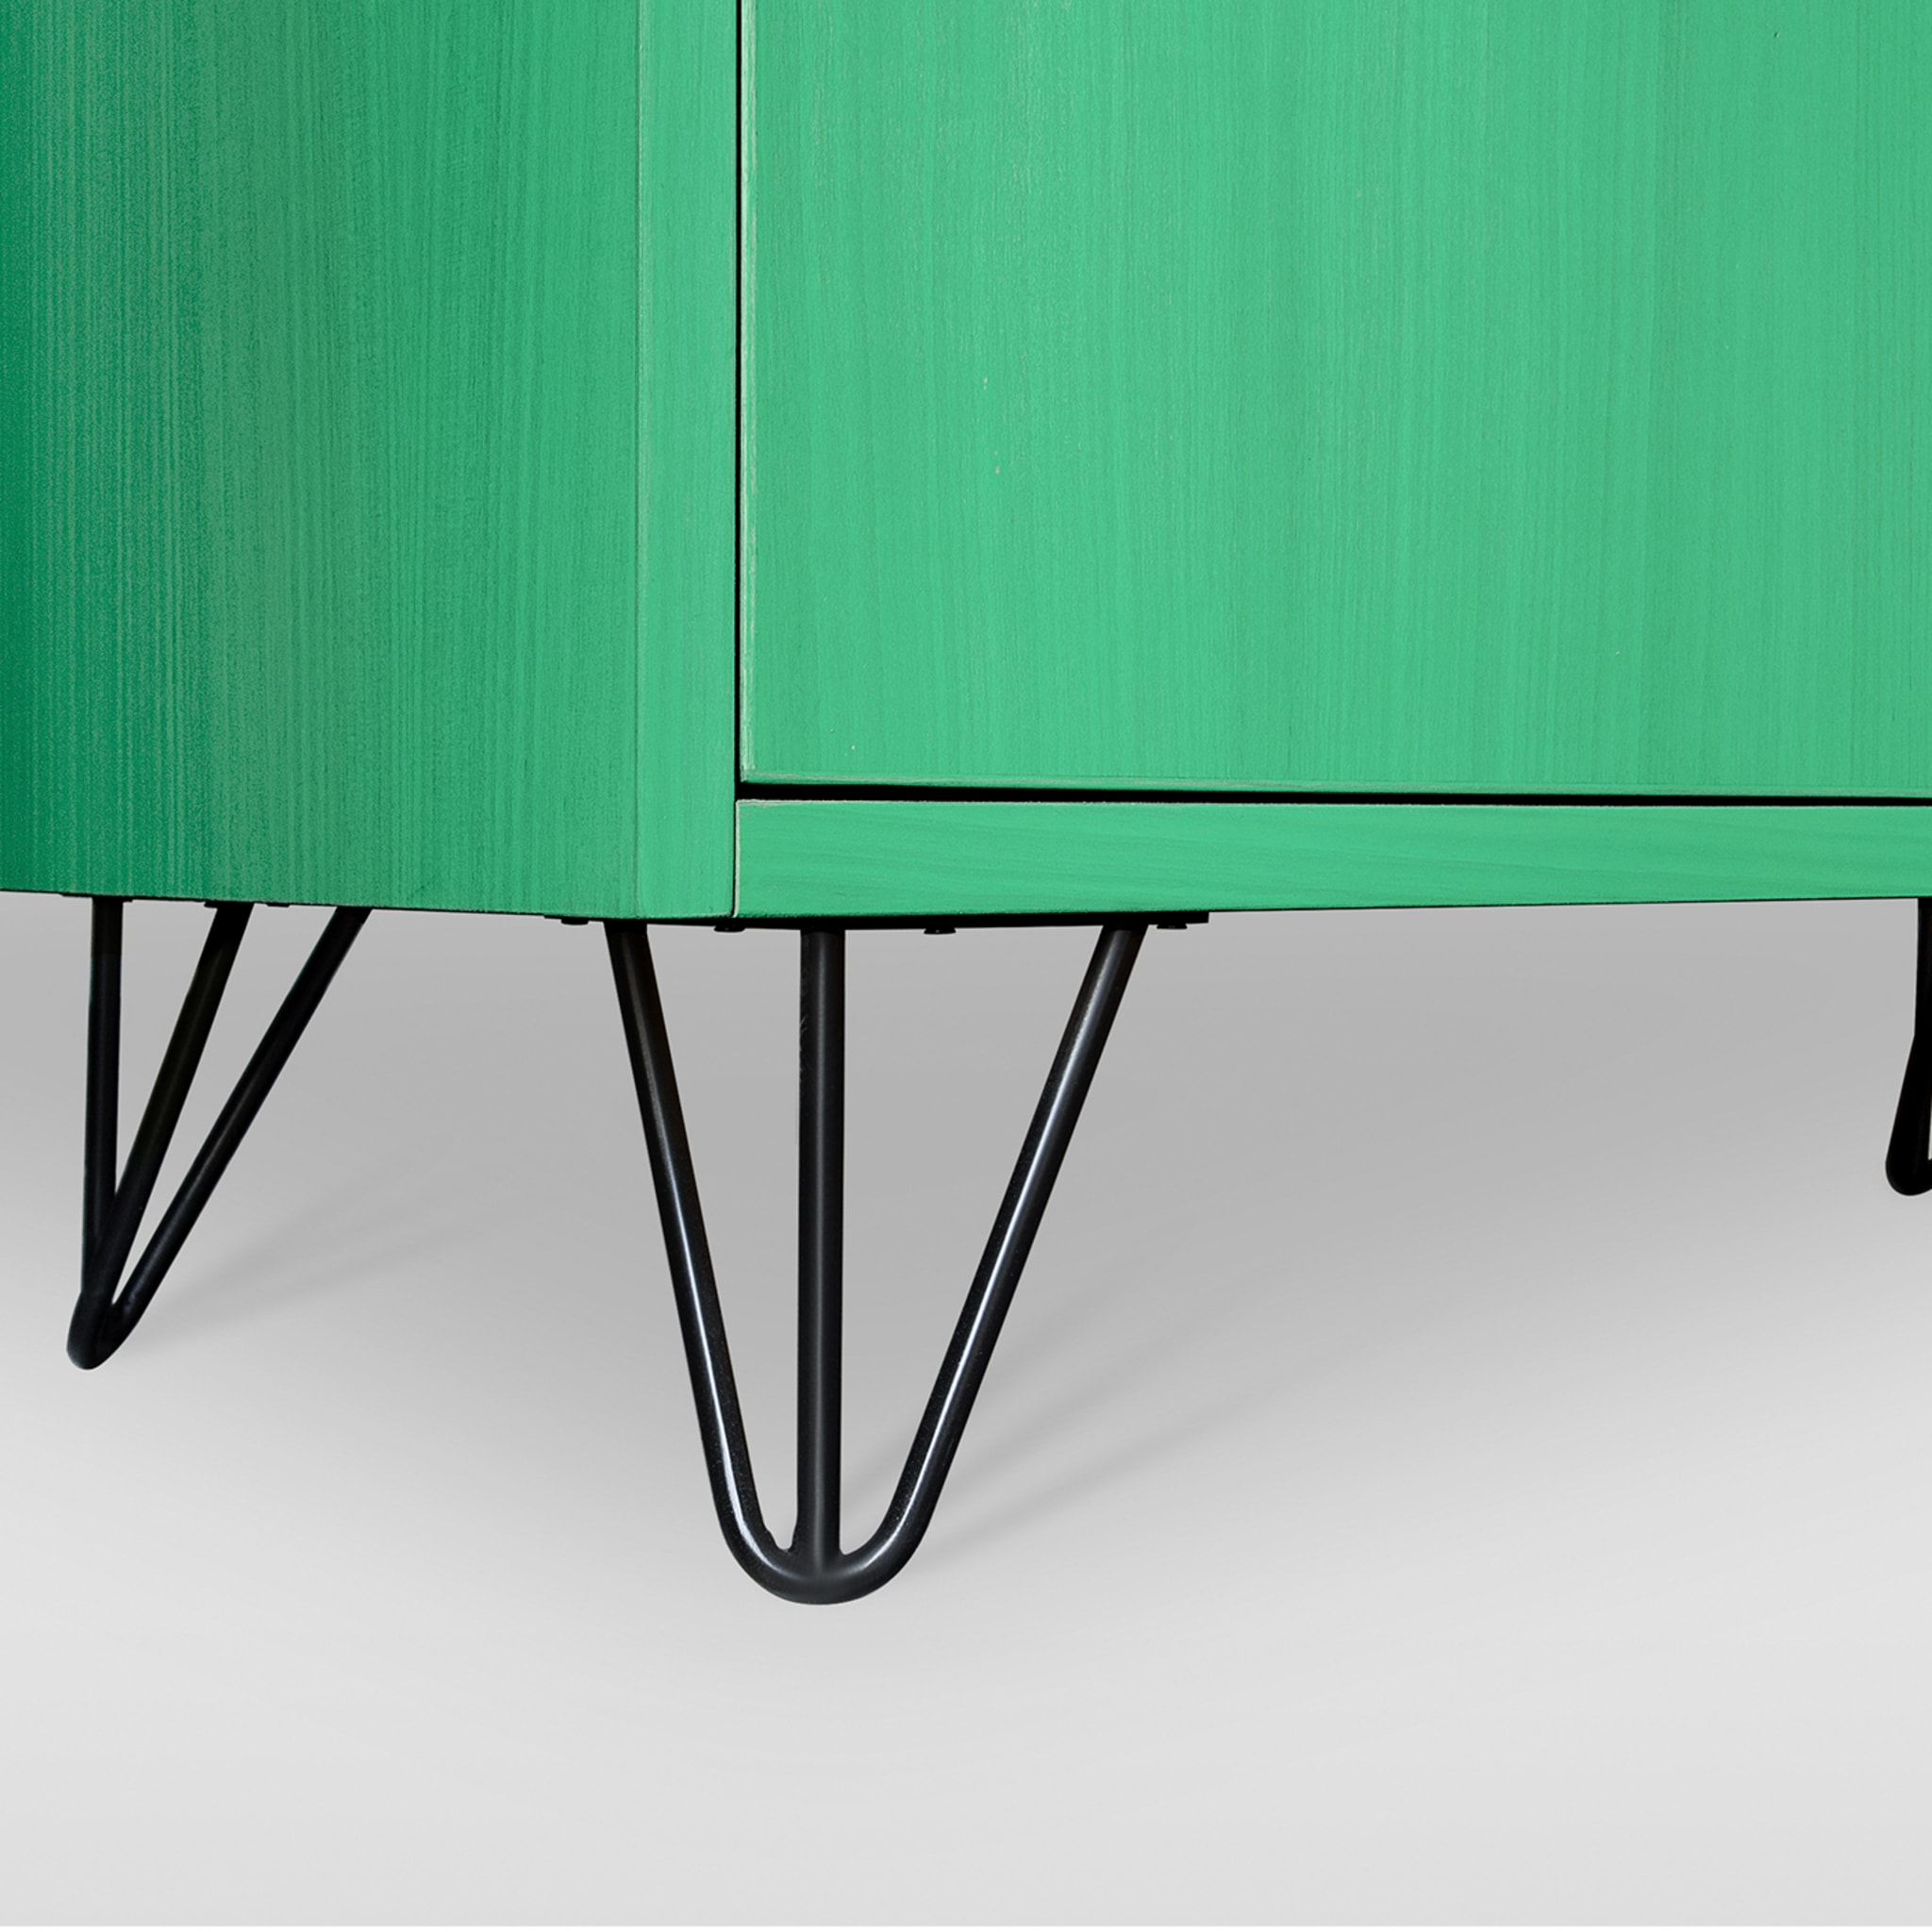 Eroica Mint Green Cabinet by Eugenio Gambella - Alternative view 2